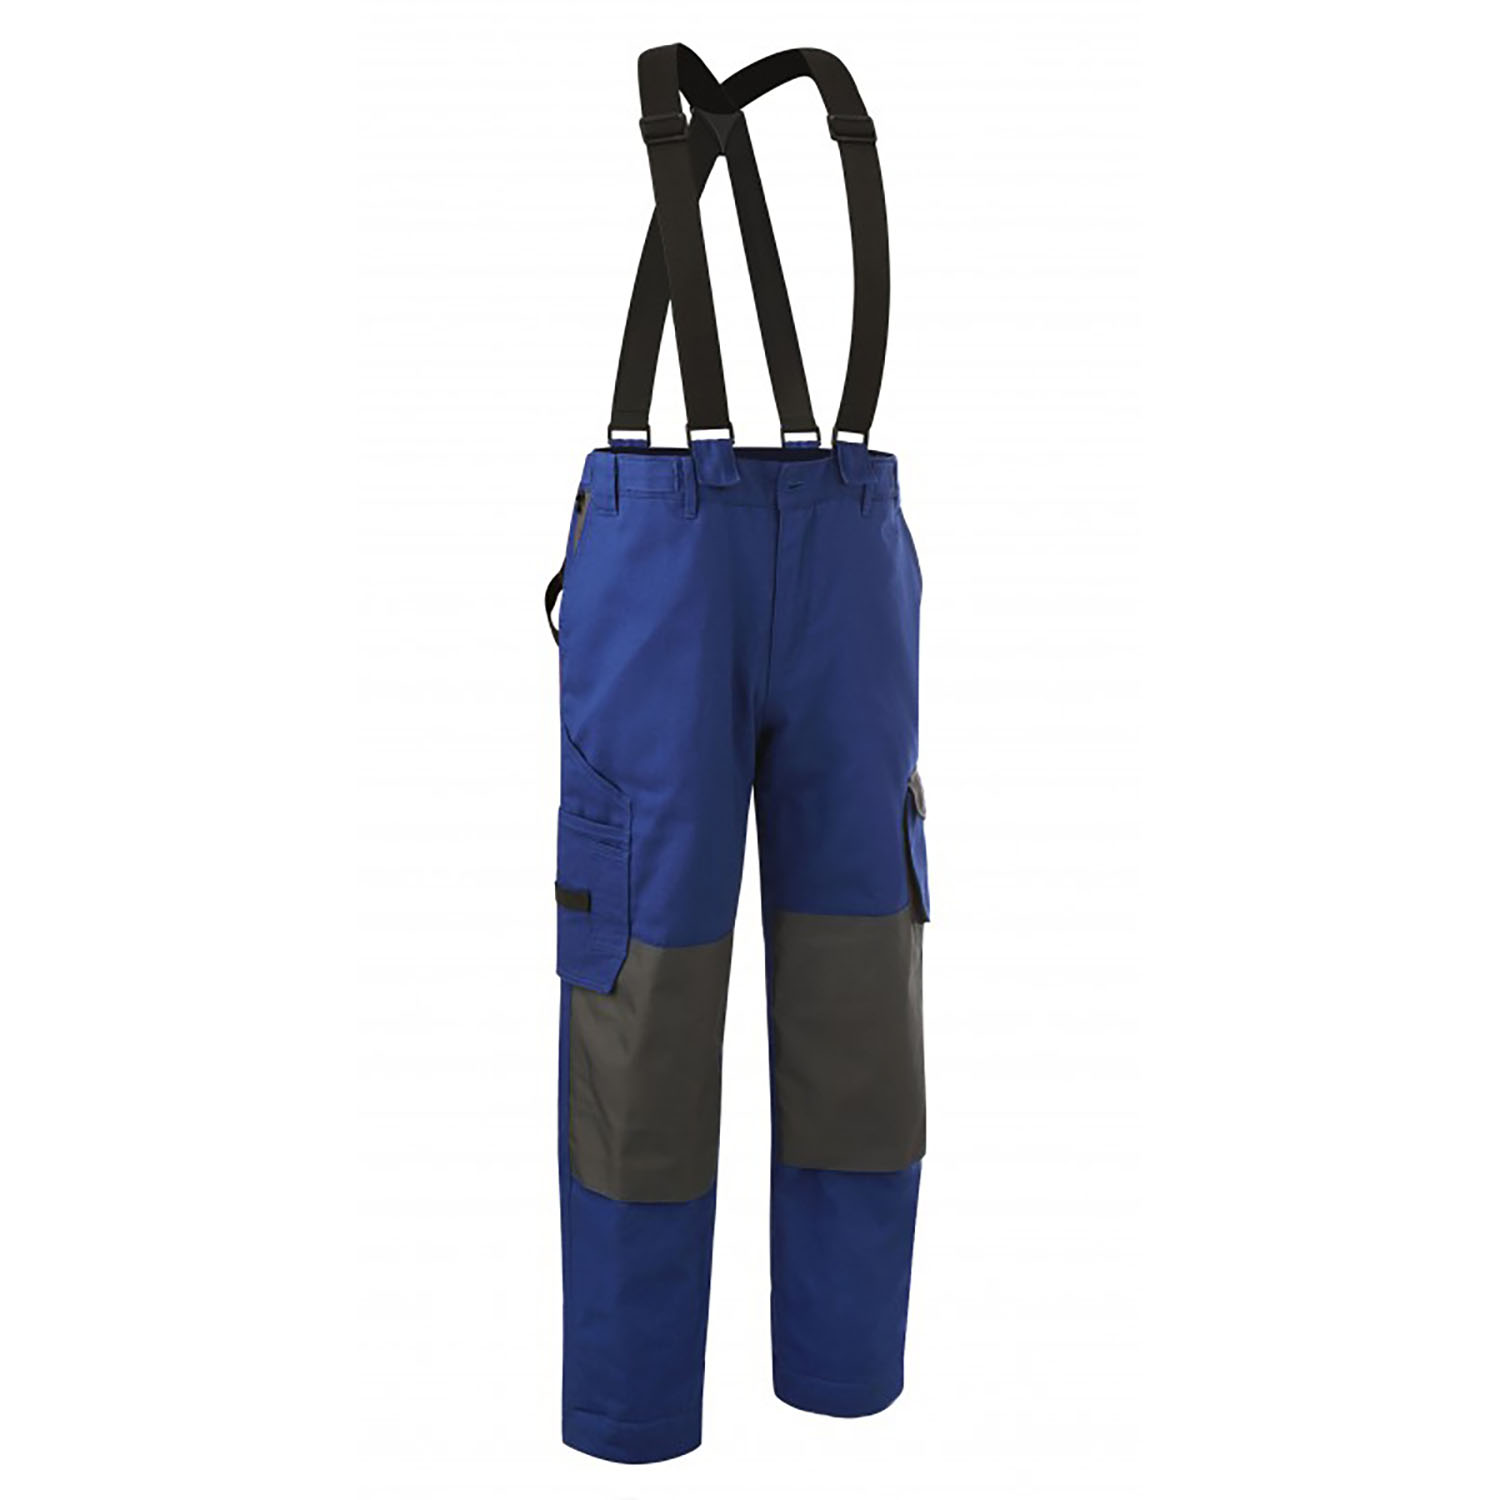 Warm Trousers with Adjustable Elasticated Braces